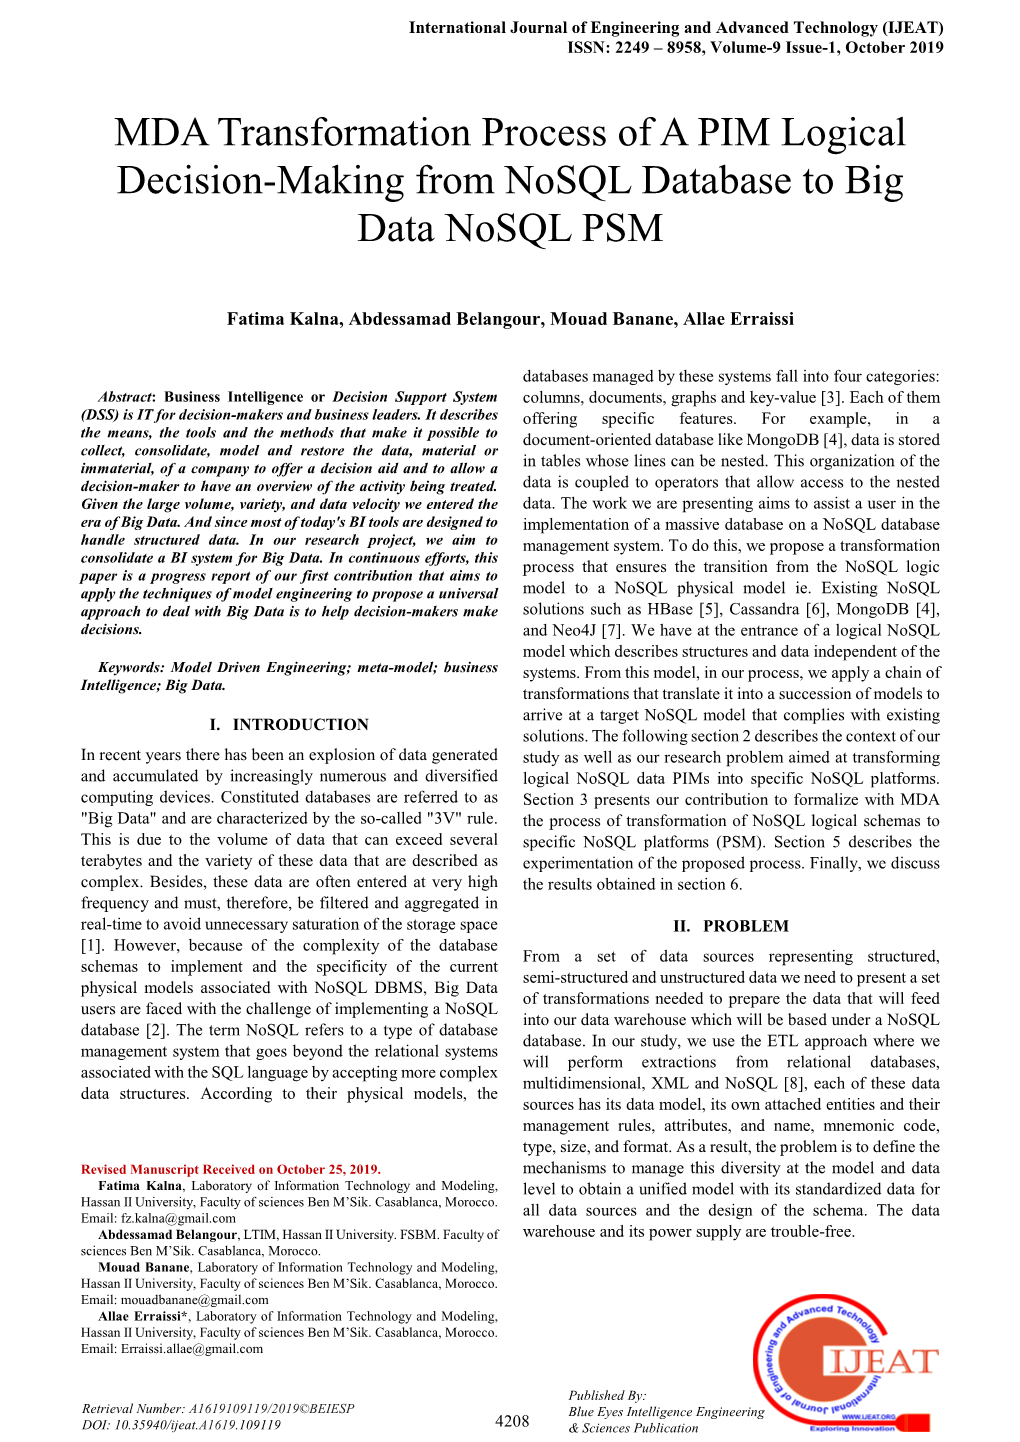 MDA Transformation Process of a PIM Logical Decision-Making from Nosql Database to Big Data Nosql PSM